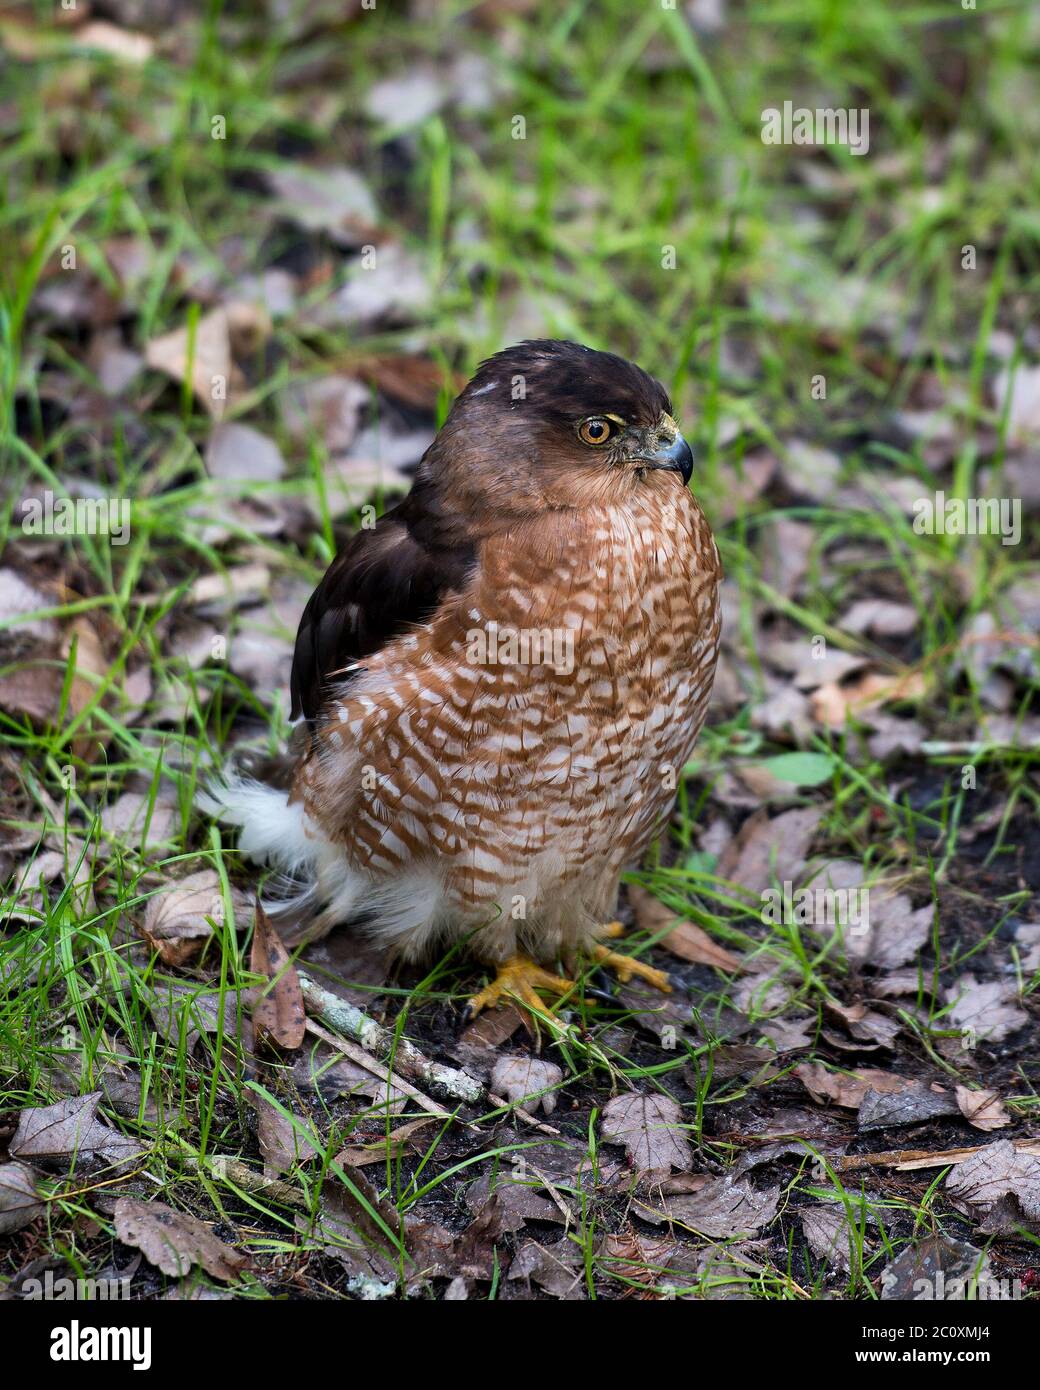 Hawk bird head close-up profile view displaying eyes, beak, brown plumage with a foliage background in its surrounding and environment. Stock Photo